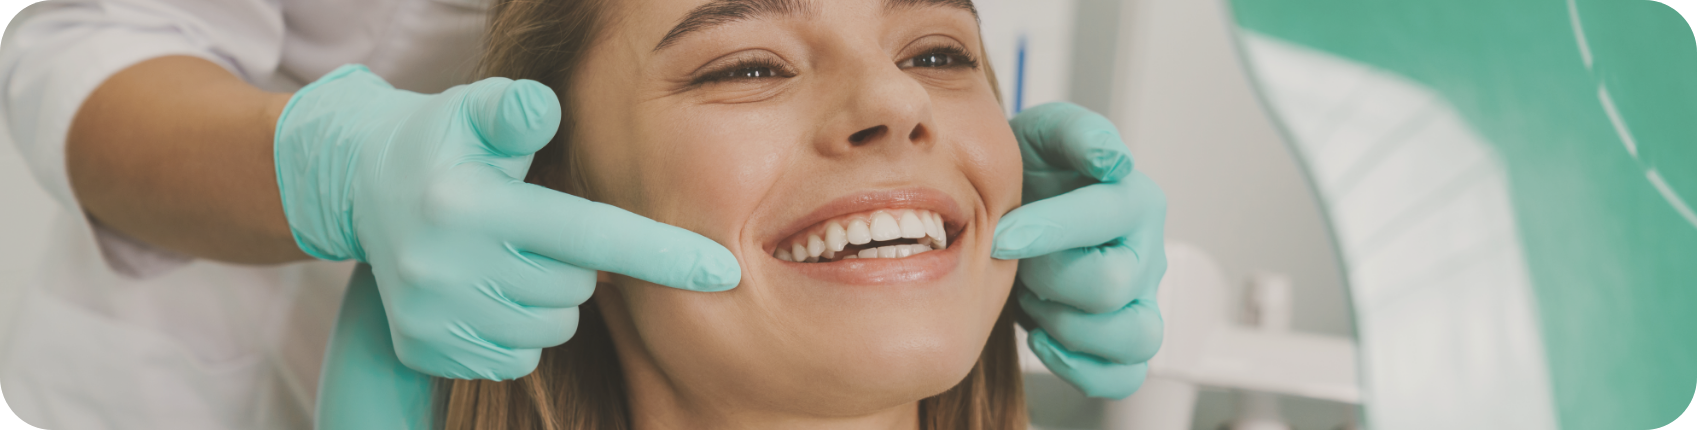 Cosmetic Dentistry example picture - woman smiling with a dentist using fingers to show the smile with green rubber gloves